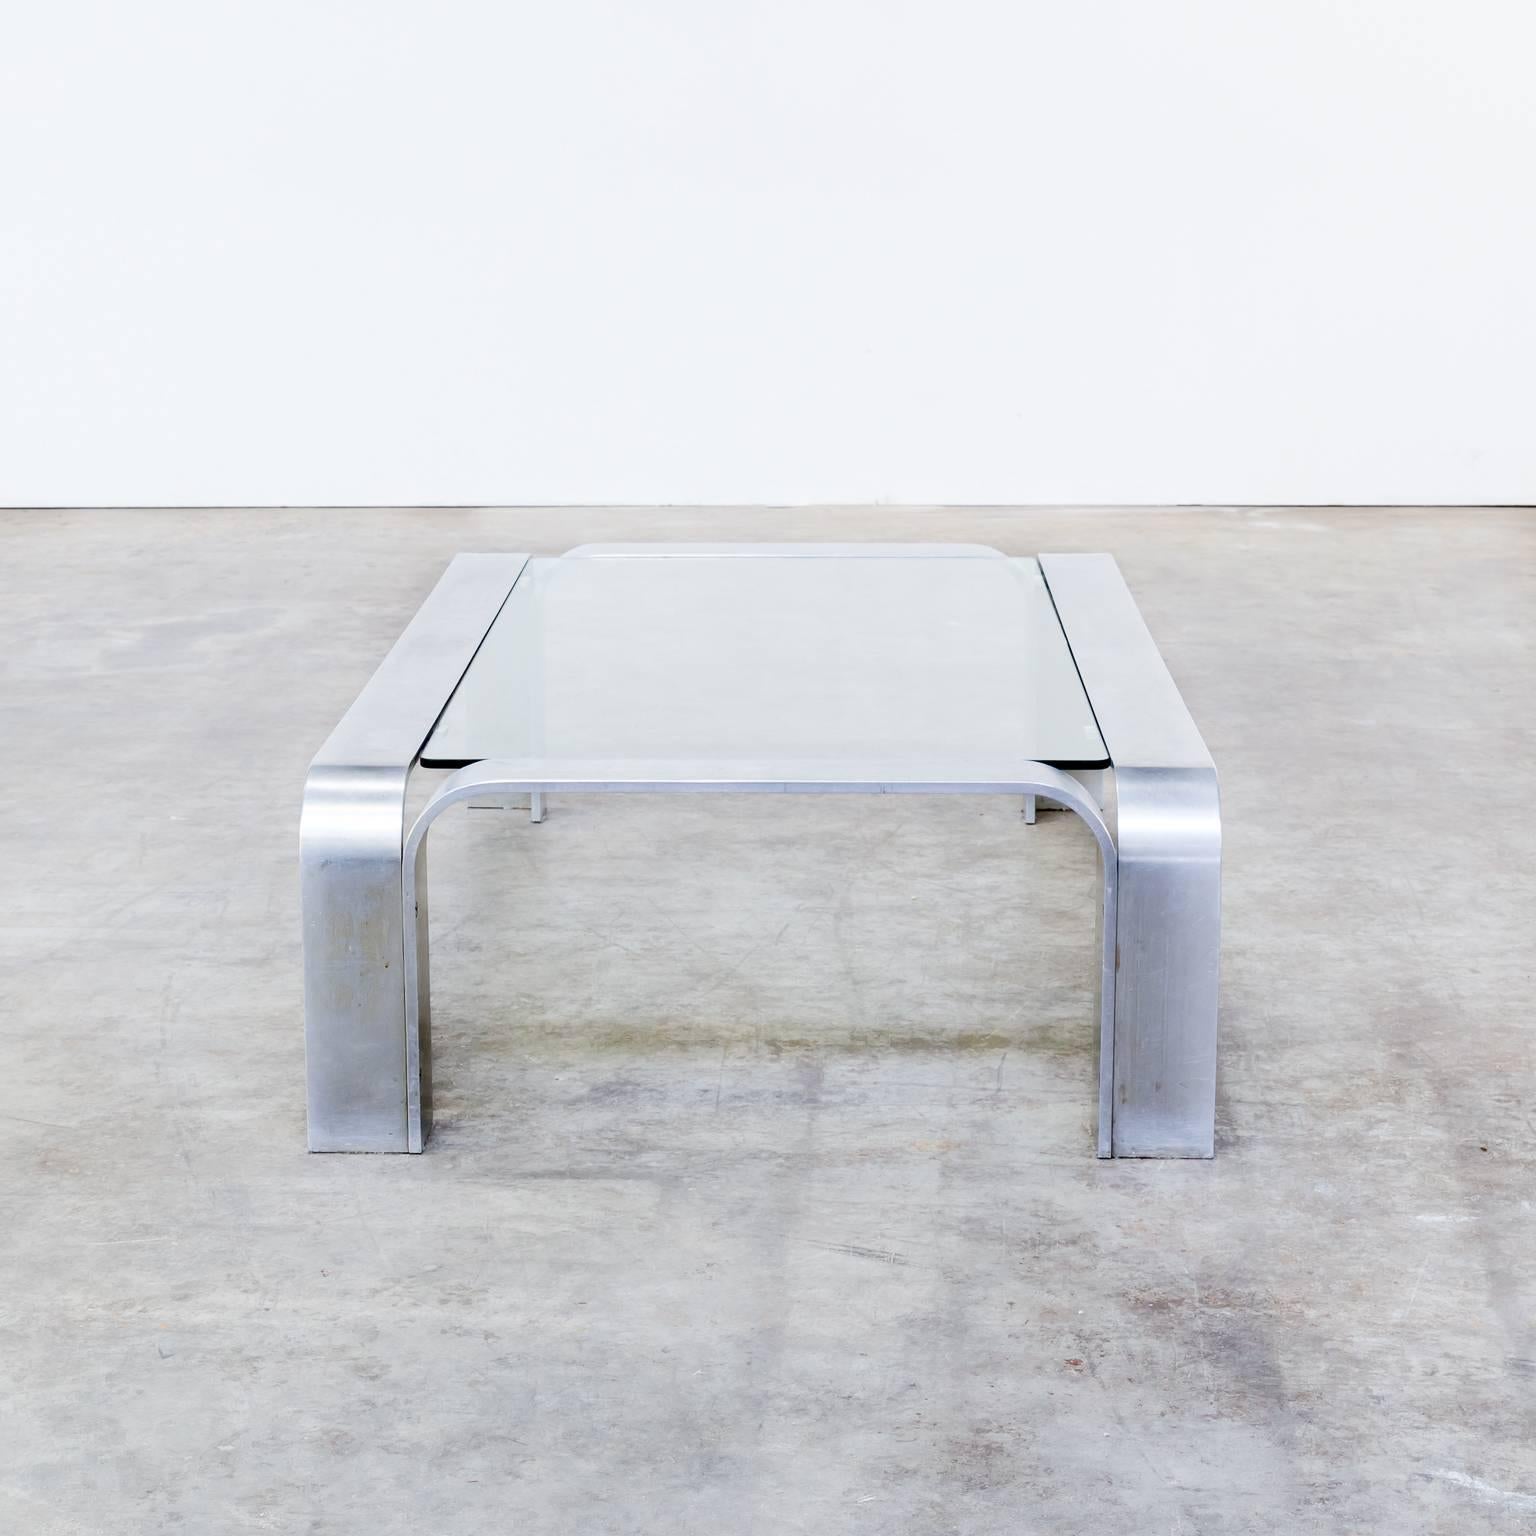 1990s coffee table in aluminium and glass. Rectangular table with glass top. The aluminium frame consist of four arches. Aluminium strips with rounded edges and nice patina. One chip of the glass and small usage scratches in it. Dimensions: 116cm W